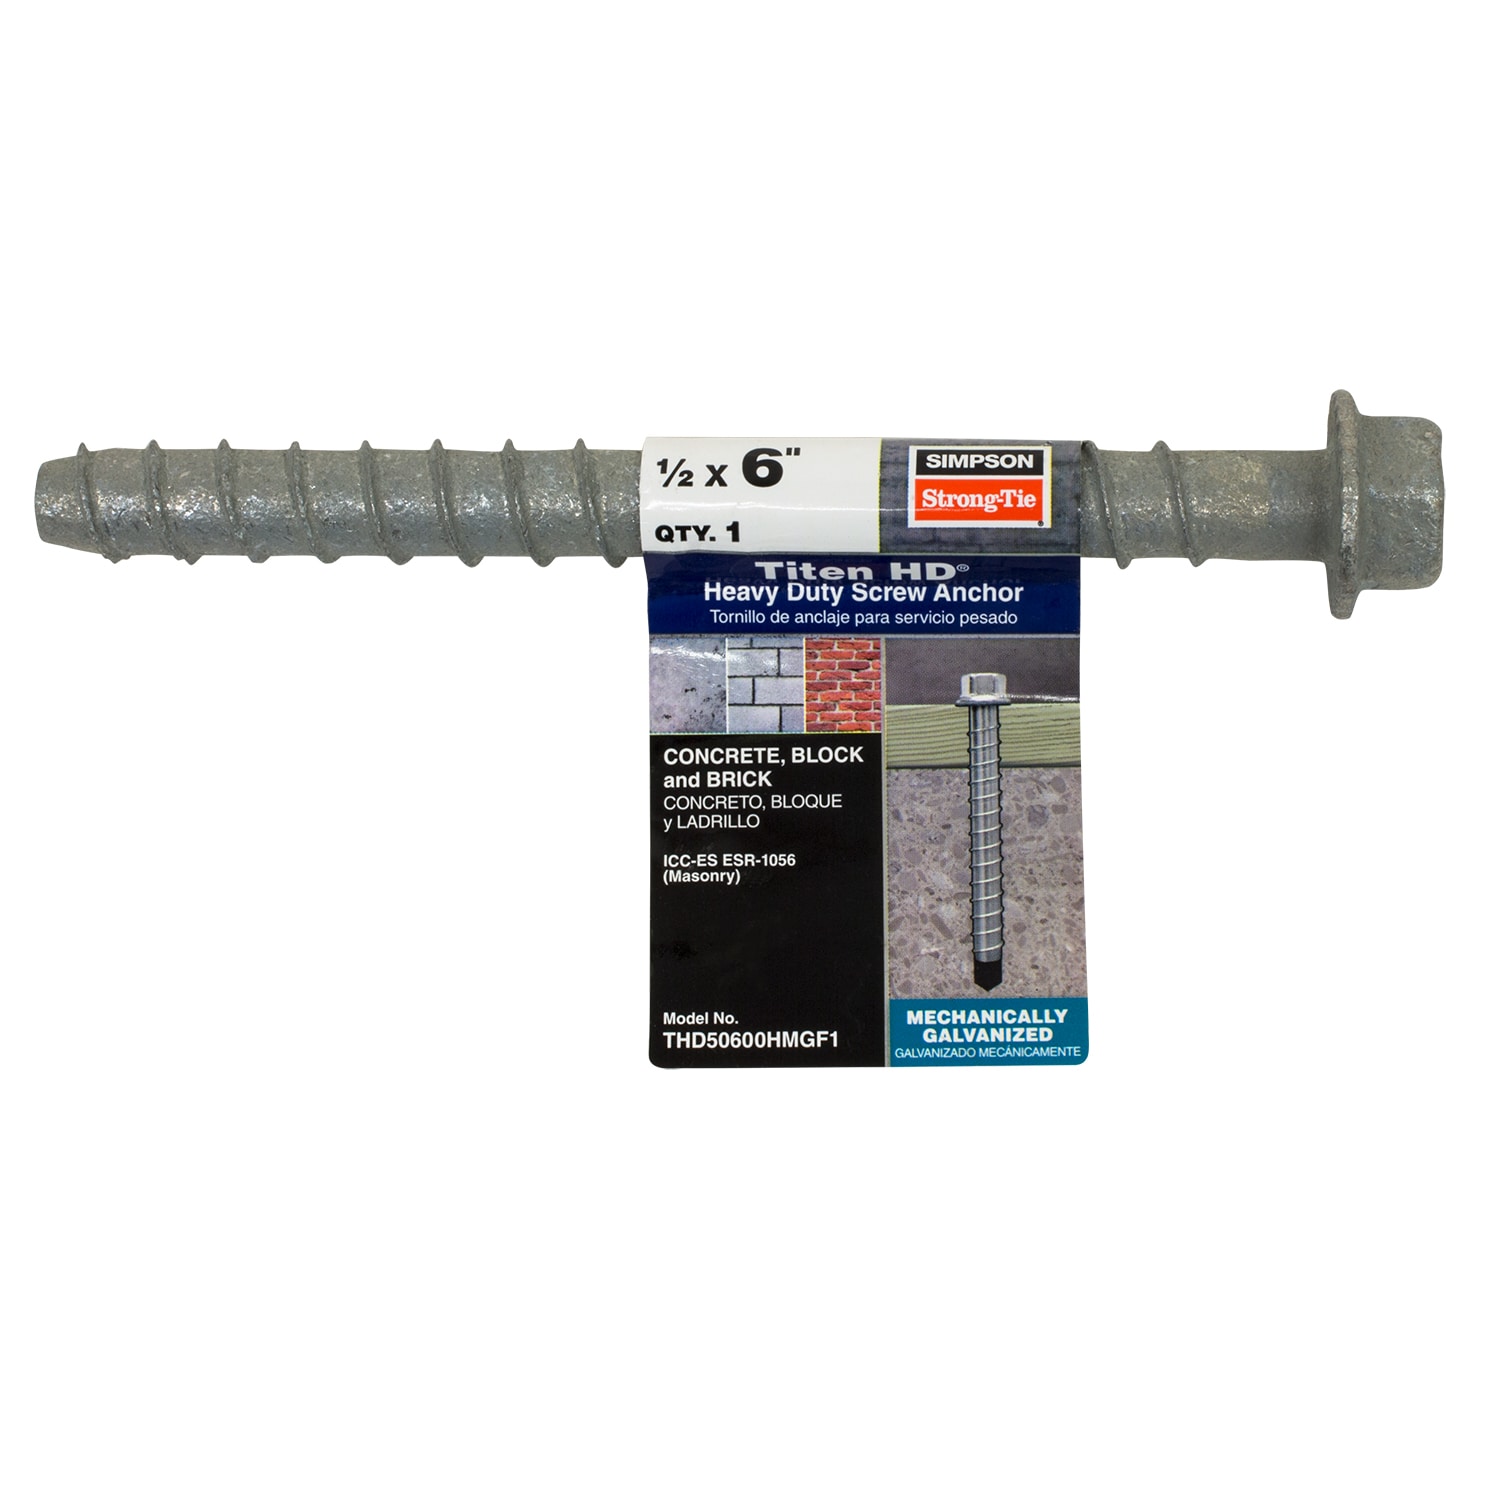 Simpson Strong-Tie 5/8-in x 6-1/2-in Concrete Anchors | THDB62612HMGF1